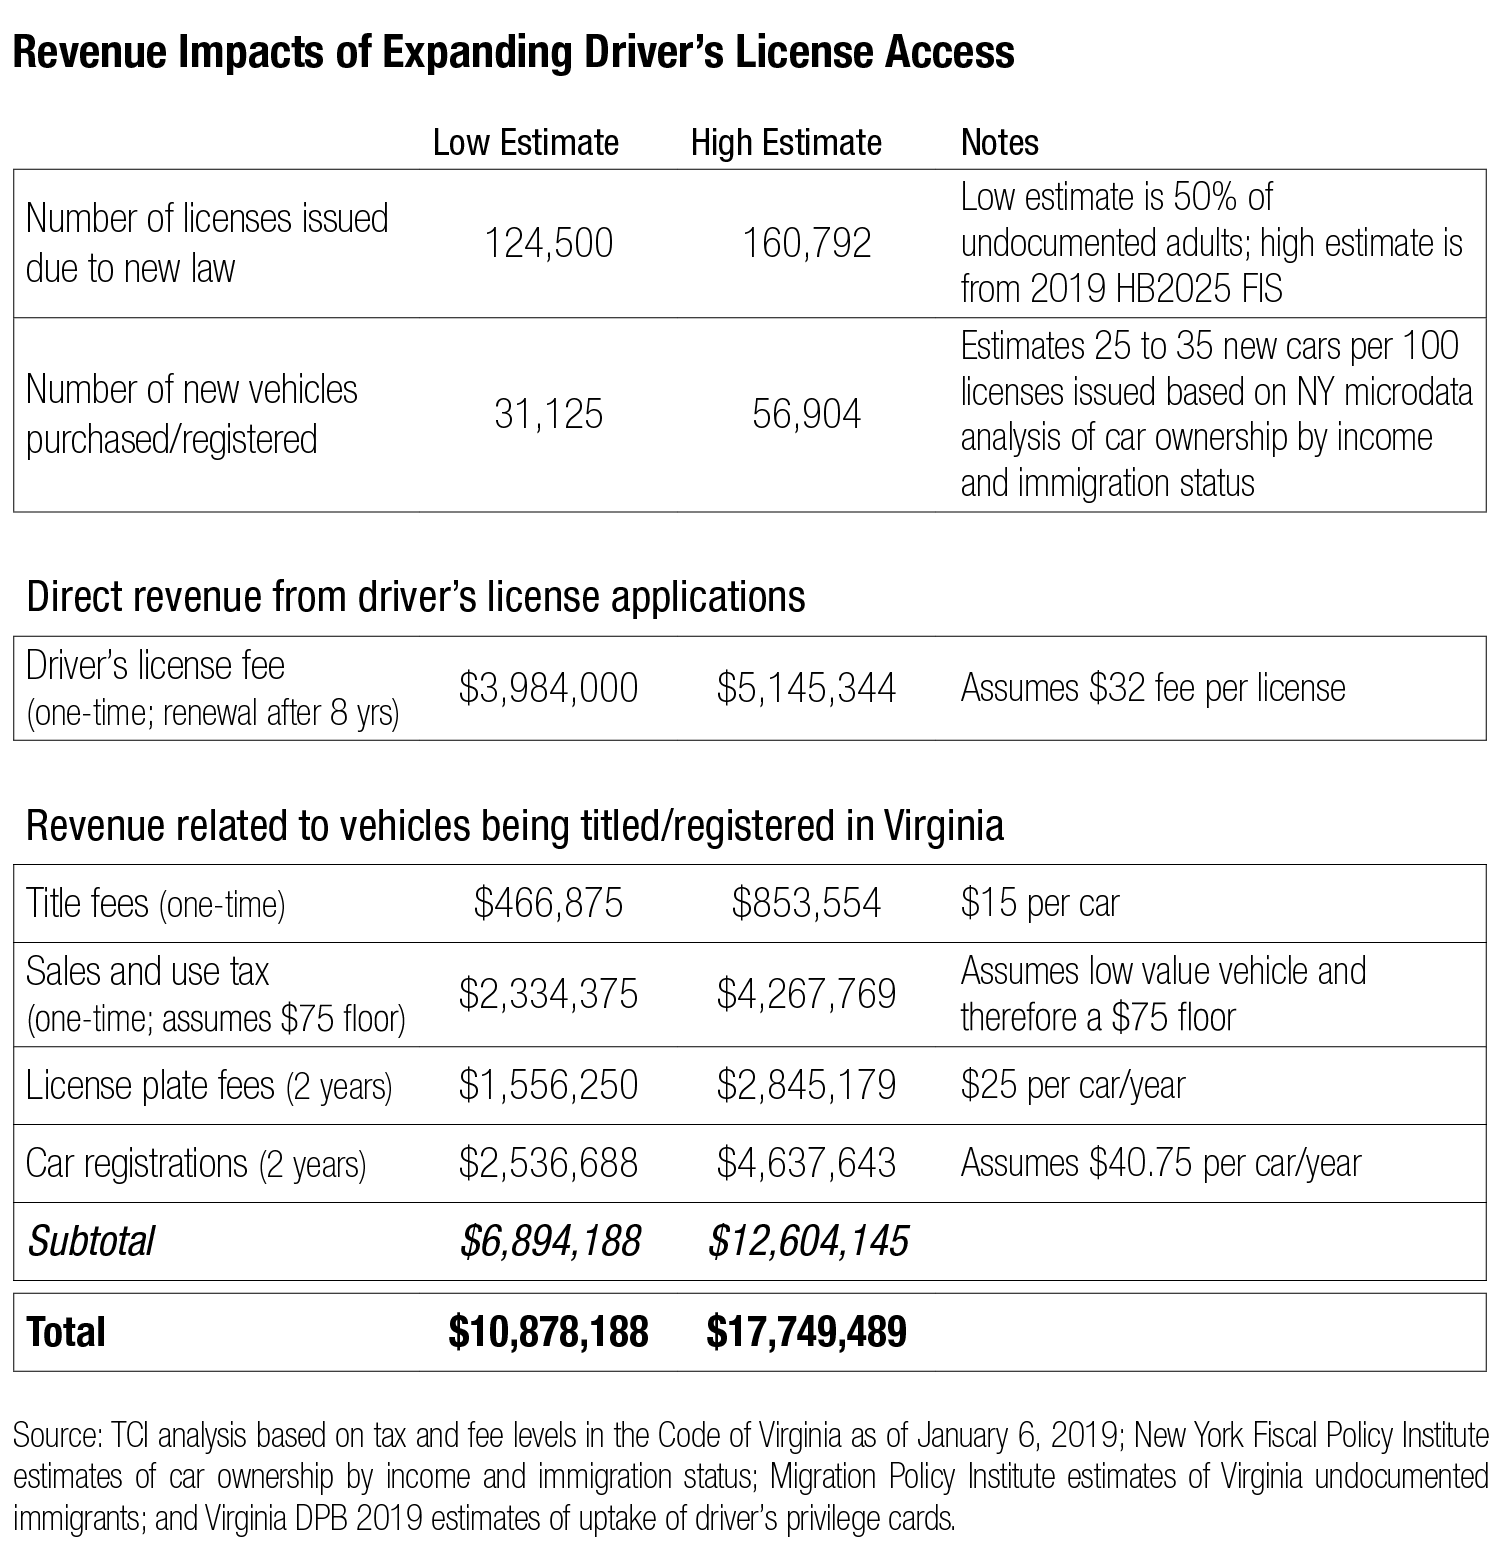 table explaining the revenue impacts of Virginia expanding drivers licenses regardless of immigration status, such as fees paid for registration and property taxes